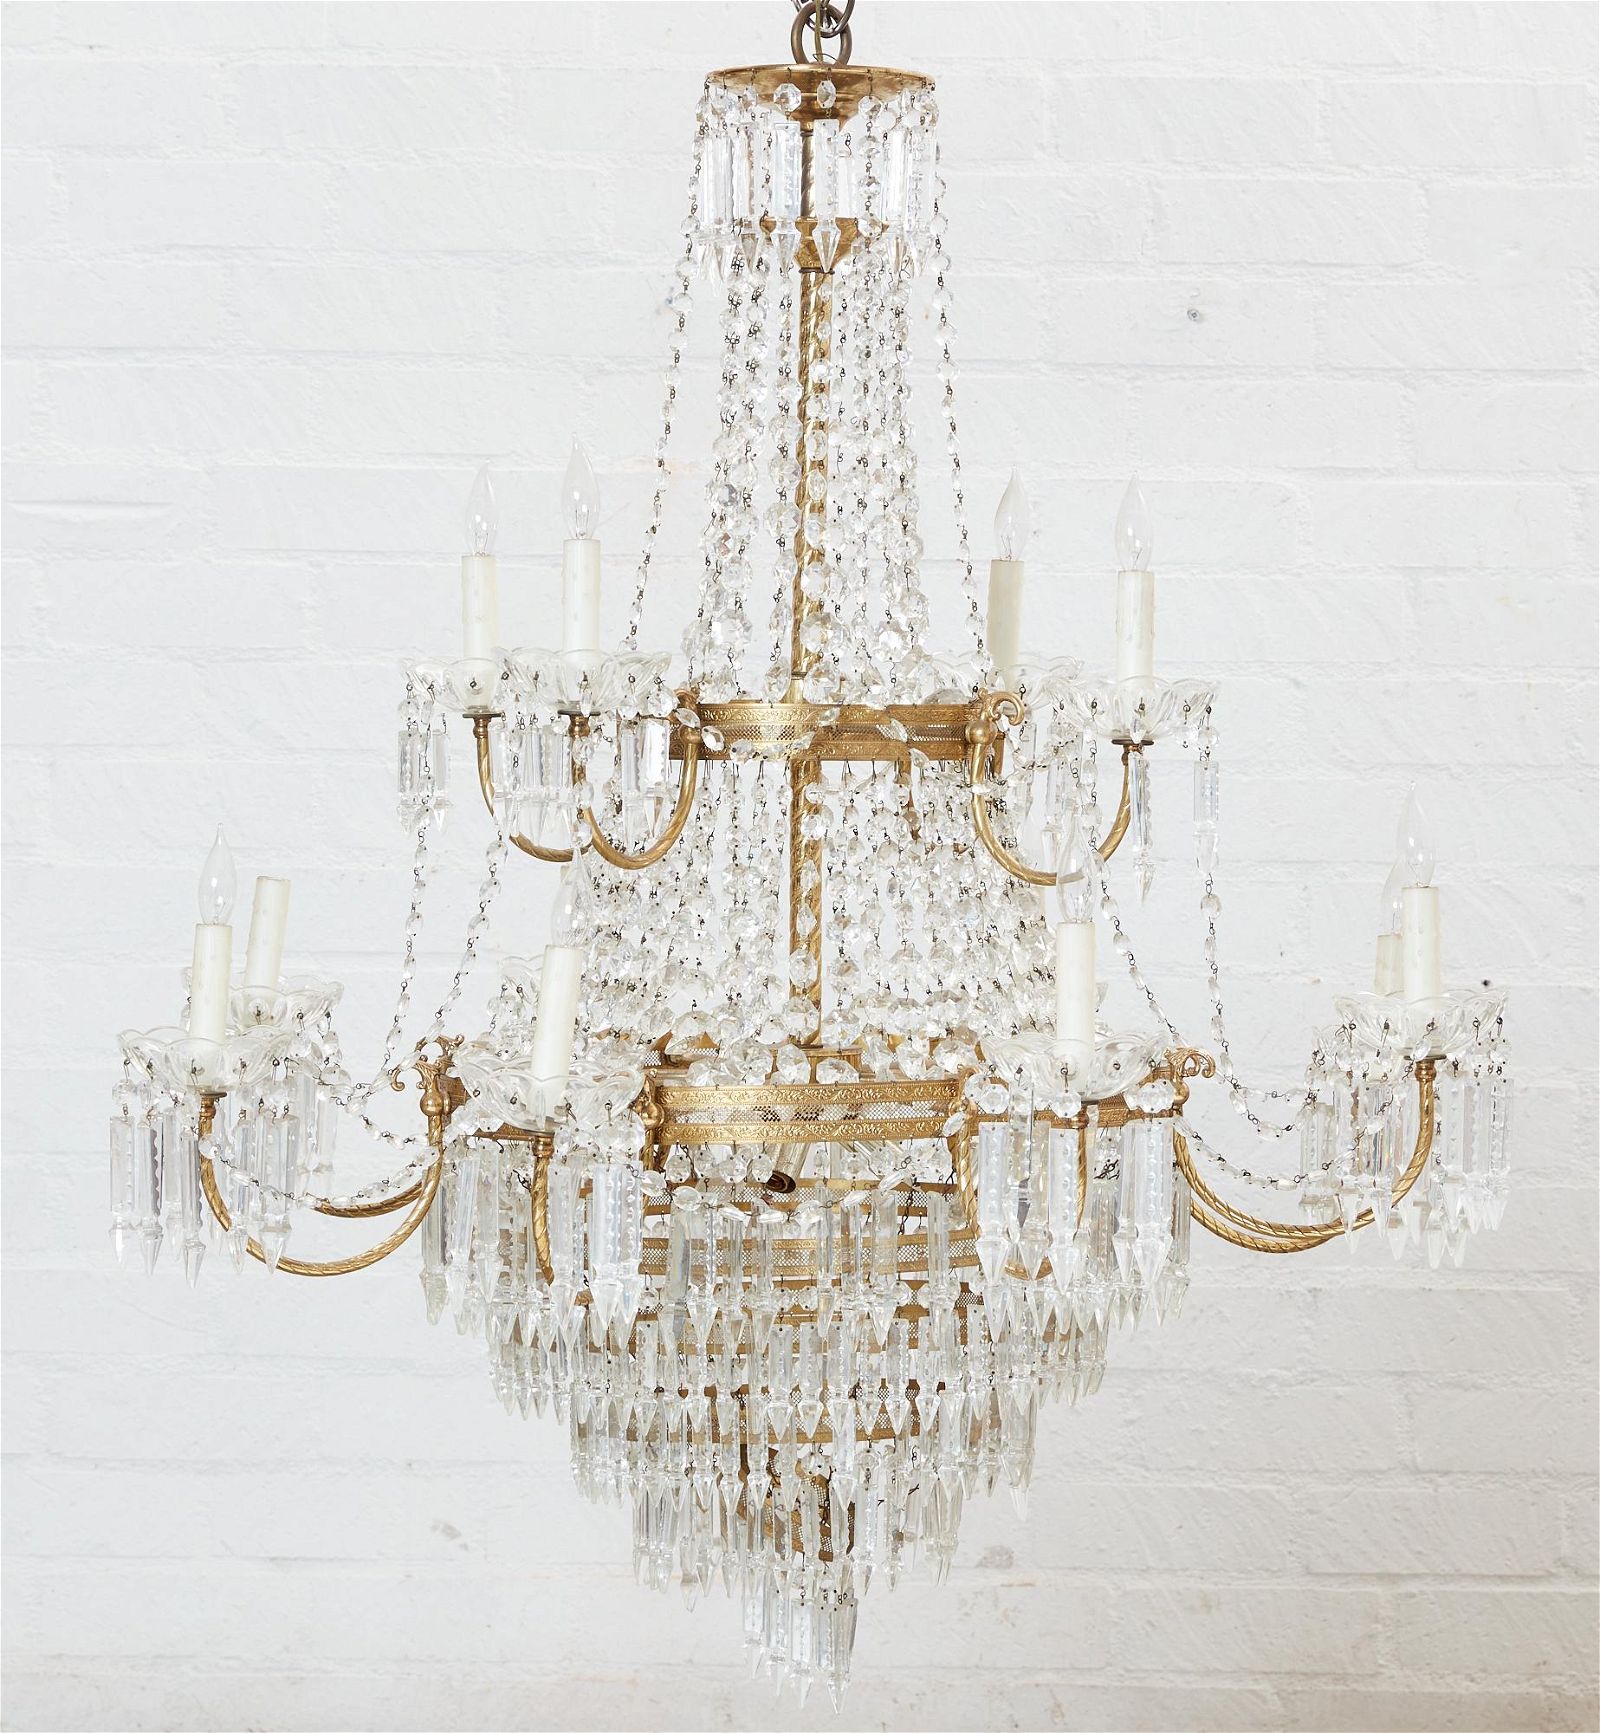 A NEOCLASSICAL STYLE TWELVE LIGHT